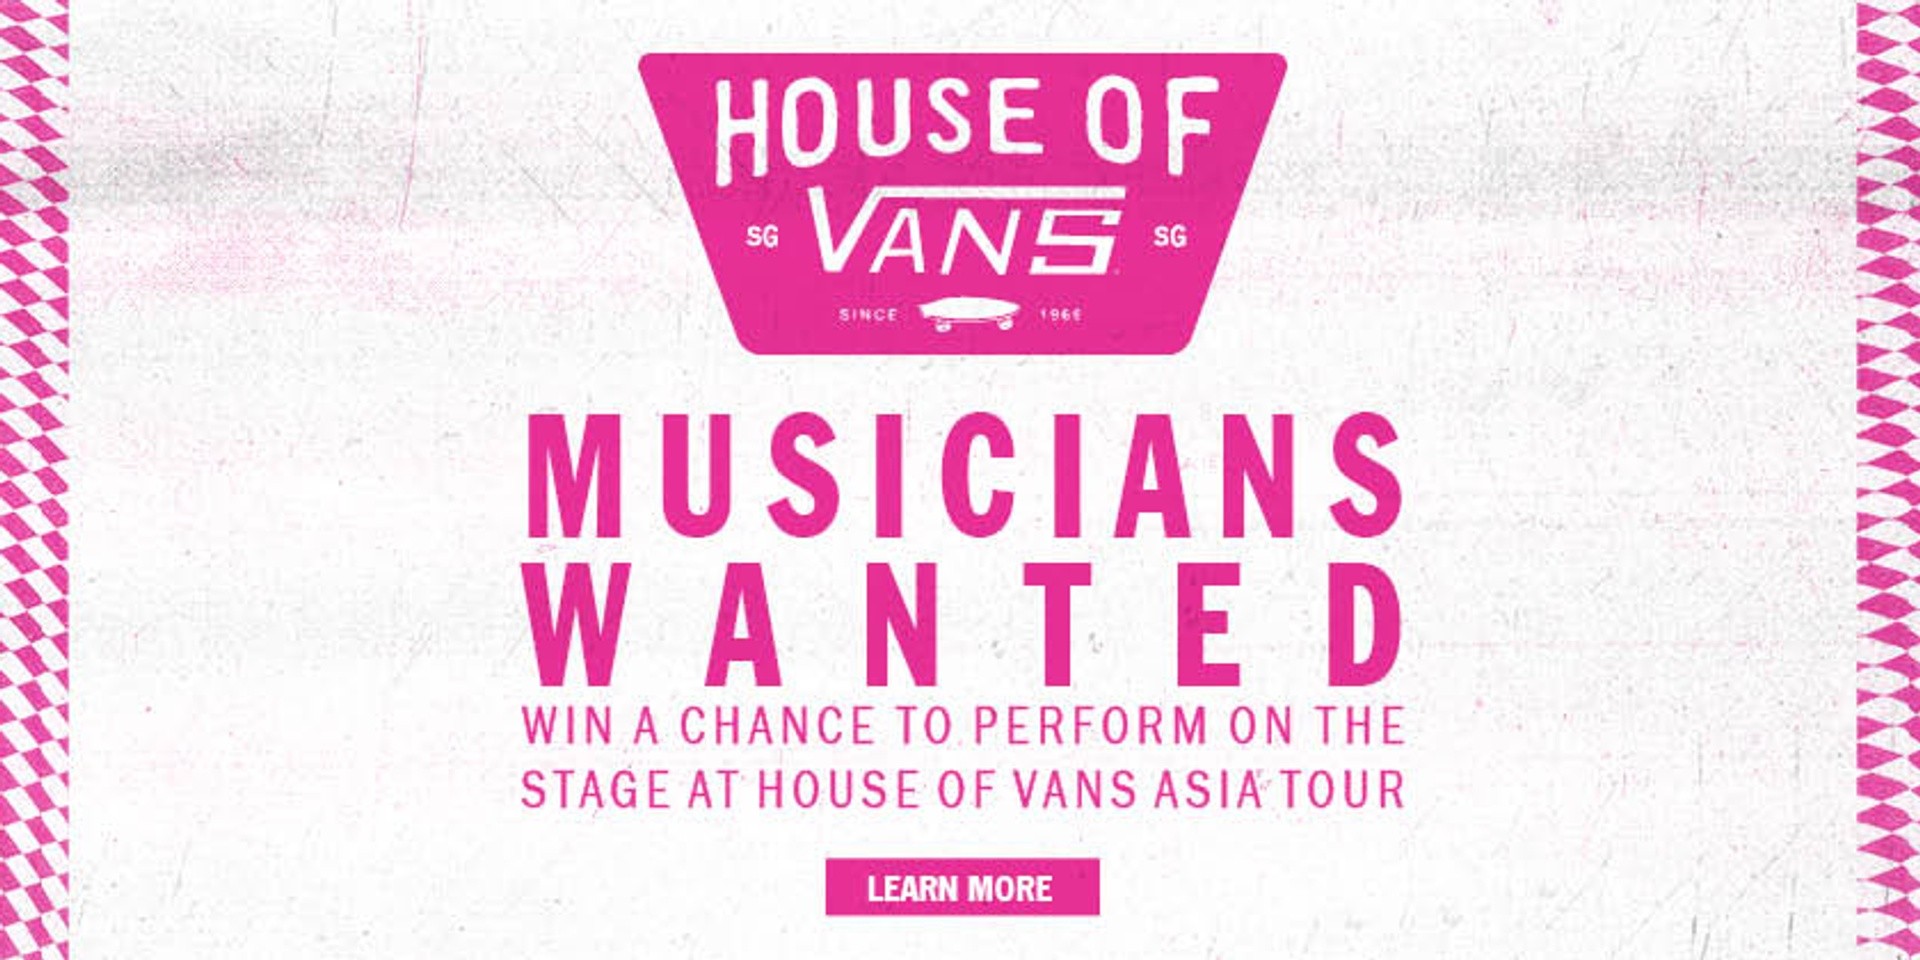 Musicians Wanted: House of Vans returns in 2017 to find talent all around Asia